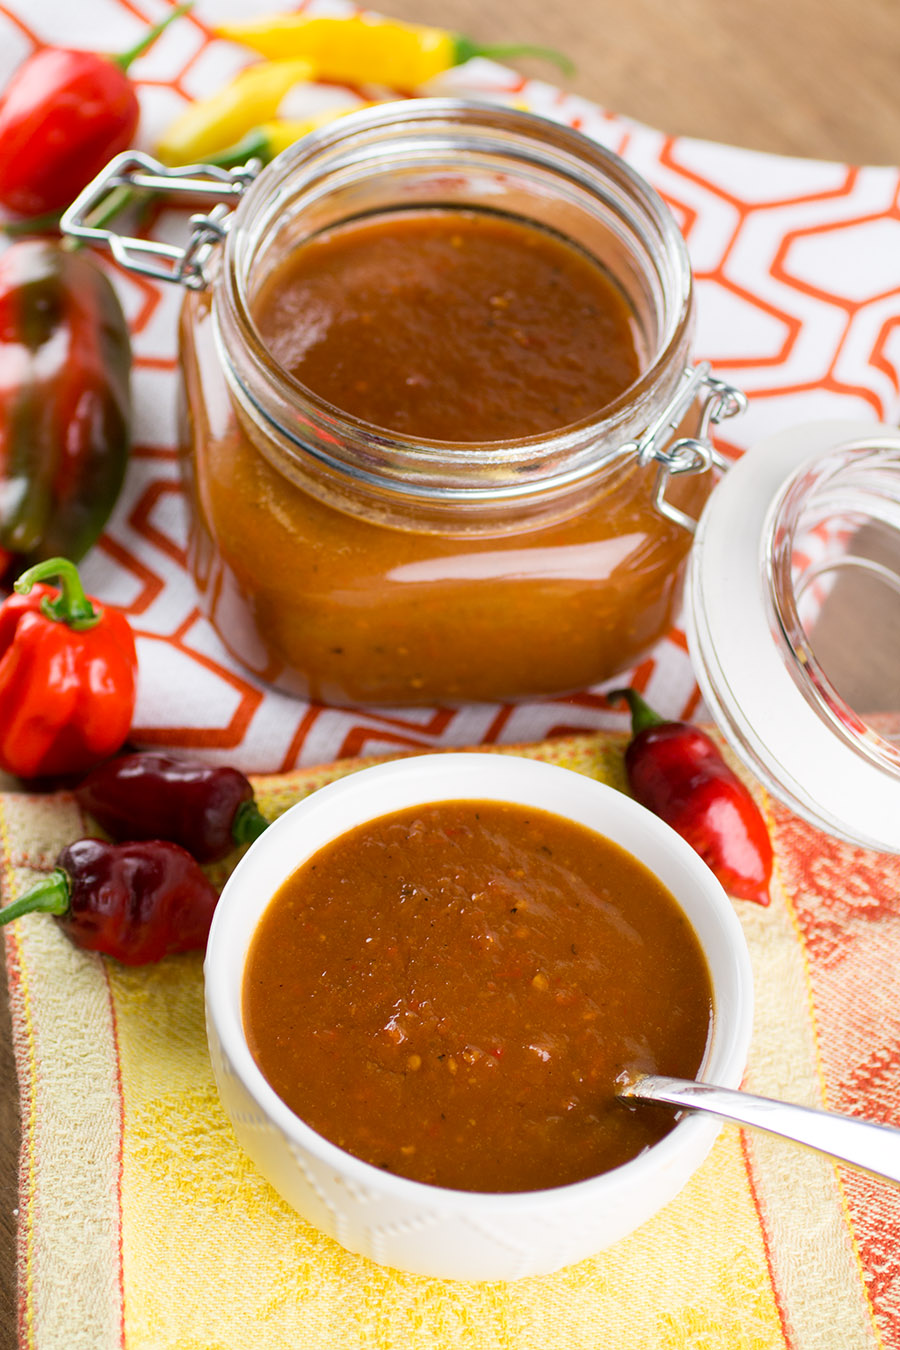 Pear Chutney with Peppers - Recipe - Chili Pepper Madness